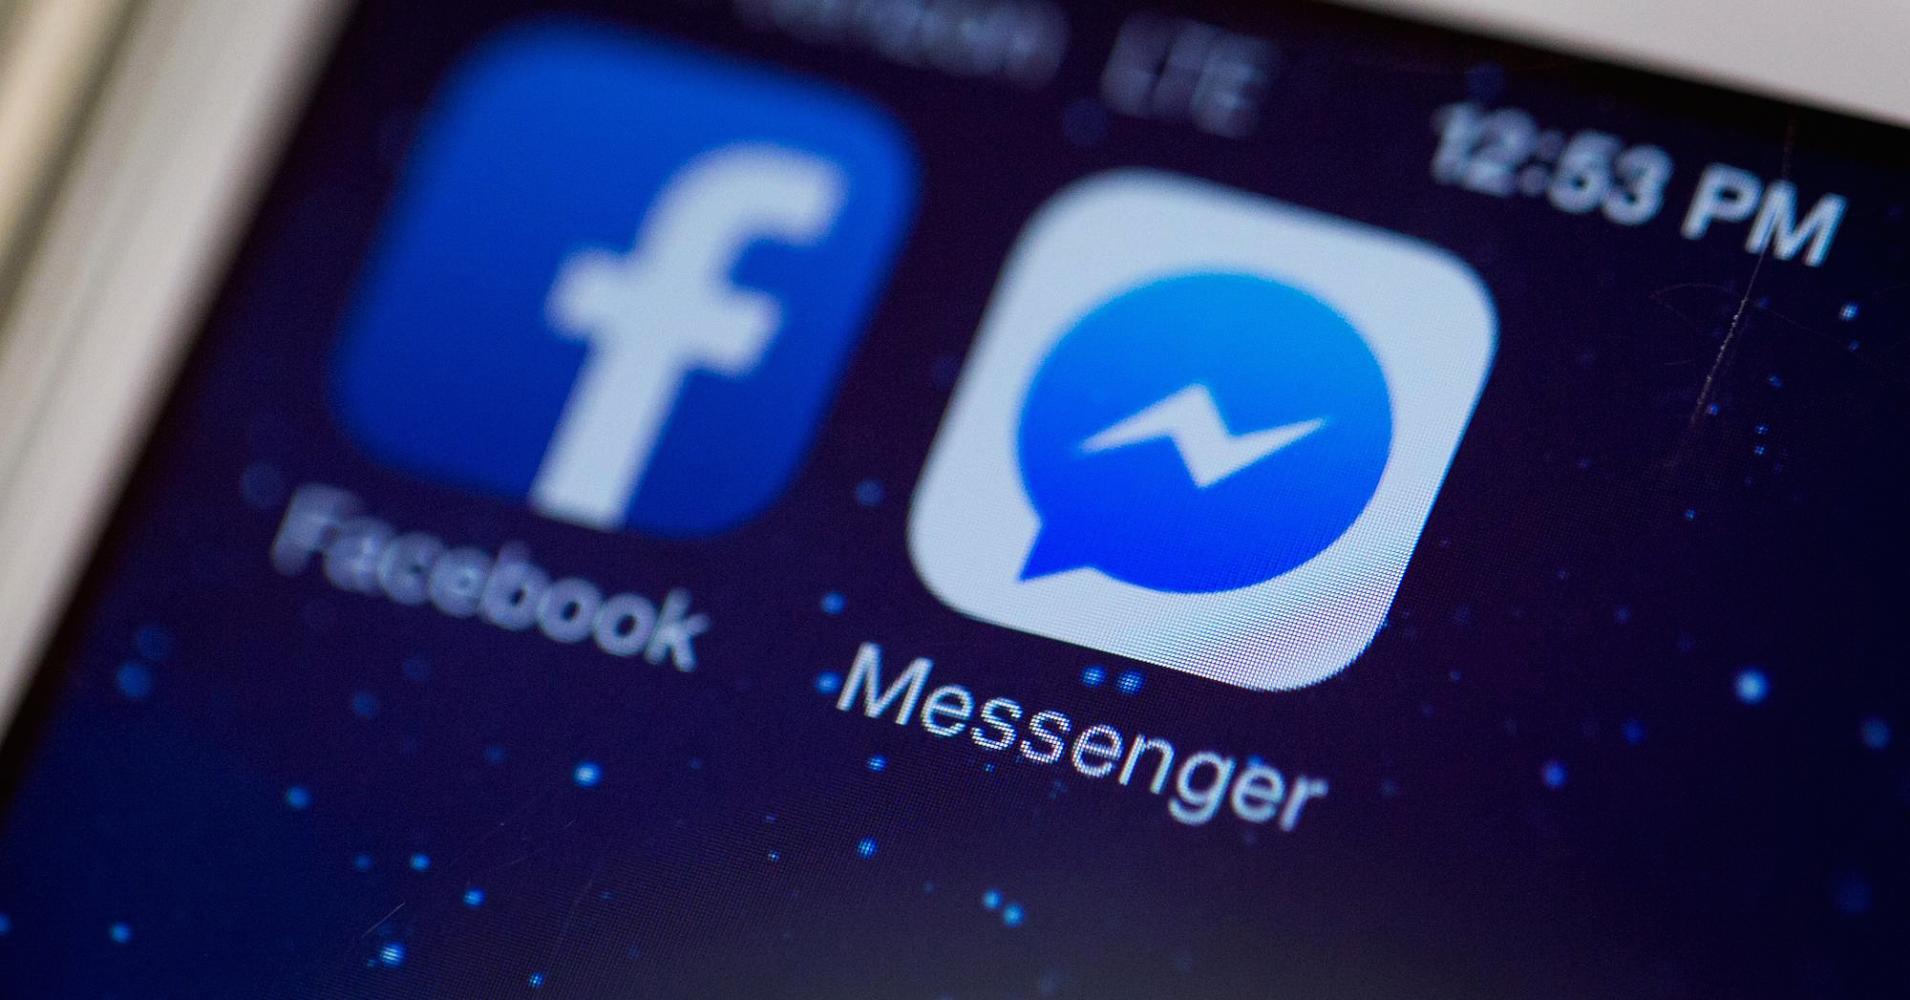 From Facebook Messenger you can share HD video and 360 degree photos